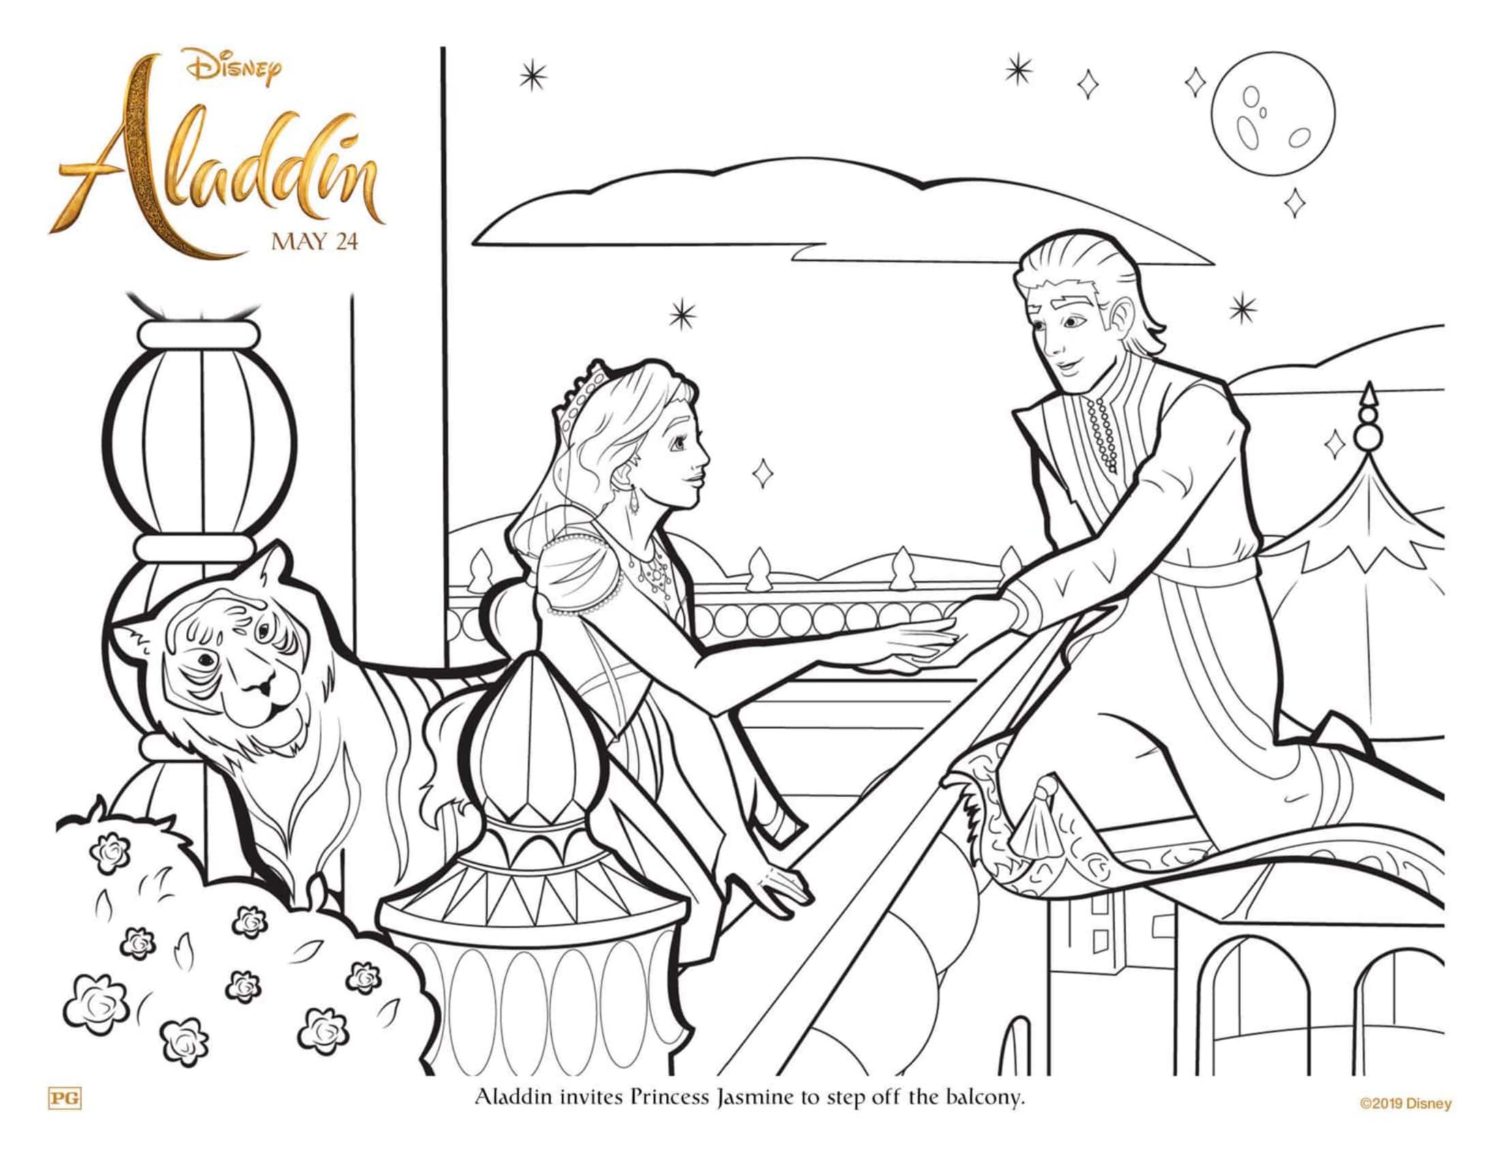 Aladdin and Jasmine Coloring Page and Activity Sheet